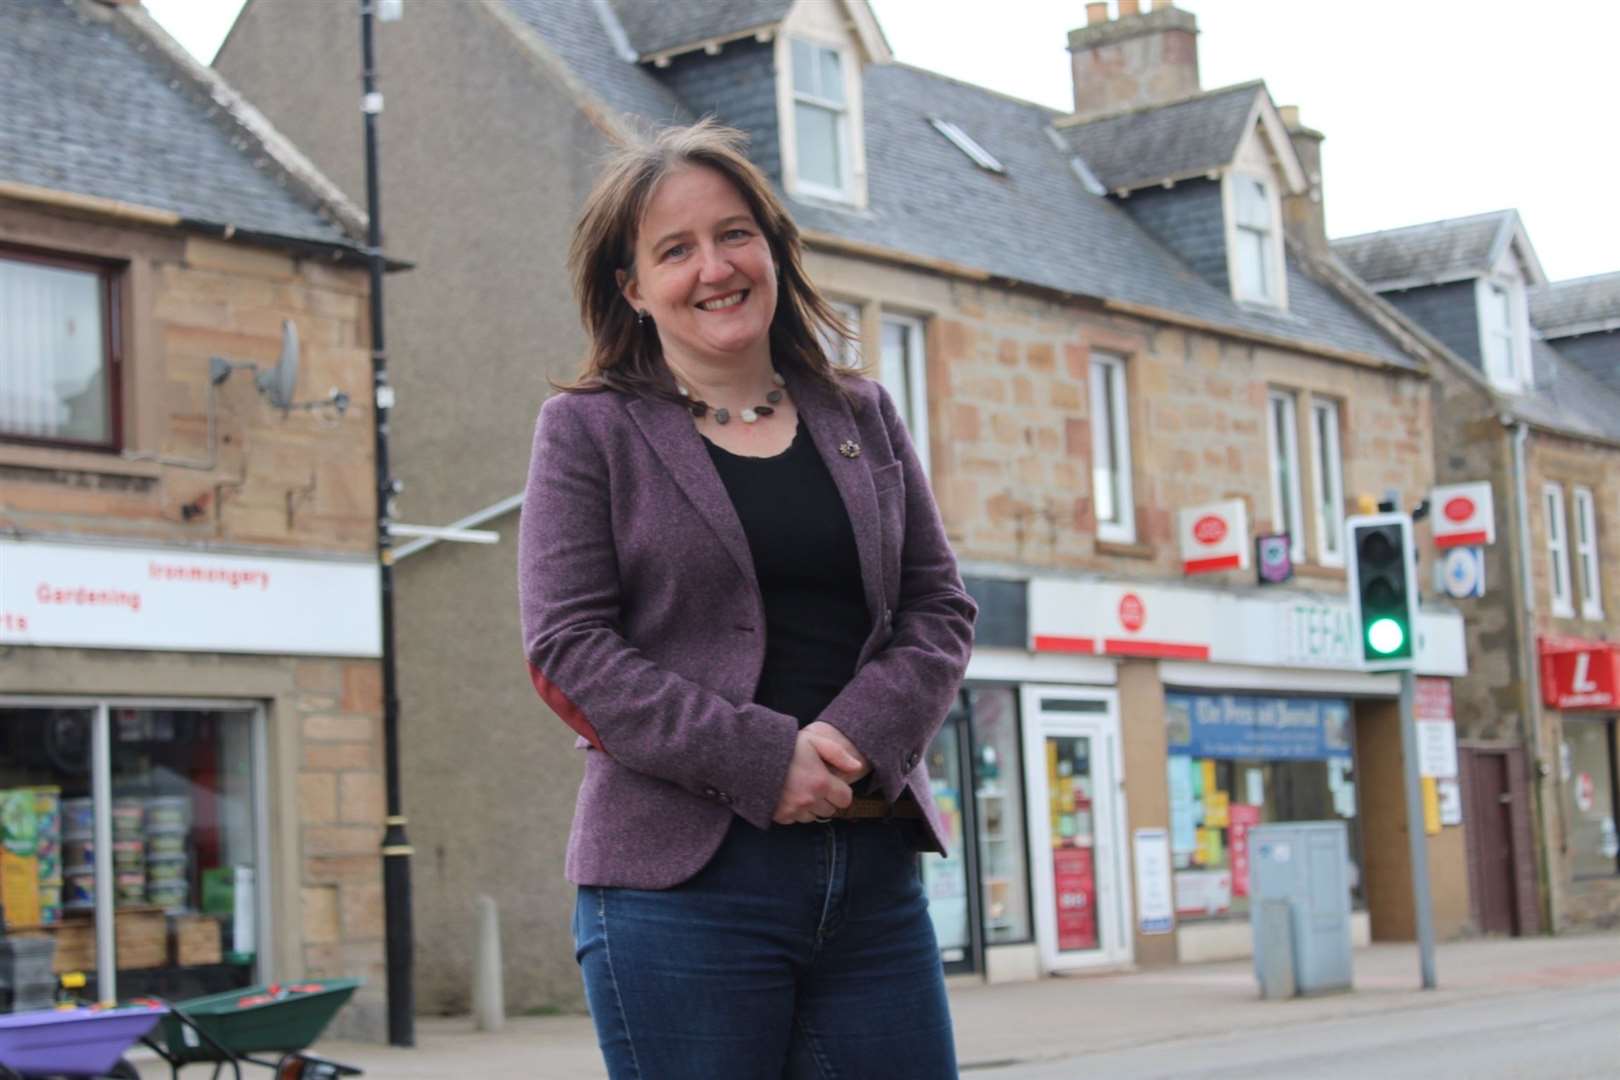 Maree Todd MSP for Caithness, Sutherland and Ross